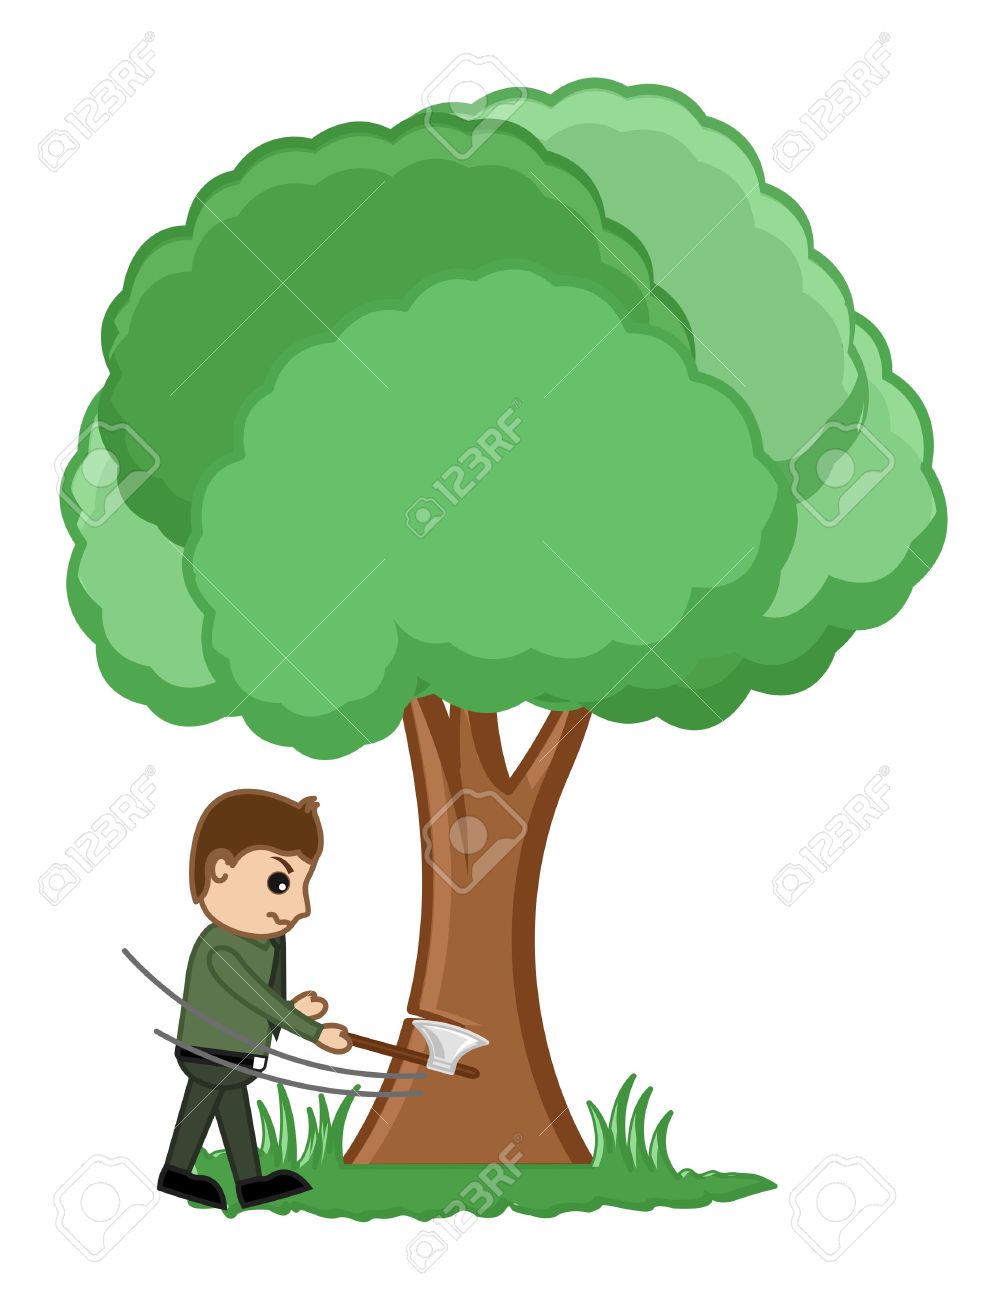 A Man Cutting A Tree With An Axe Clipart.